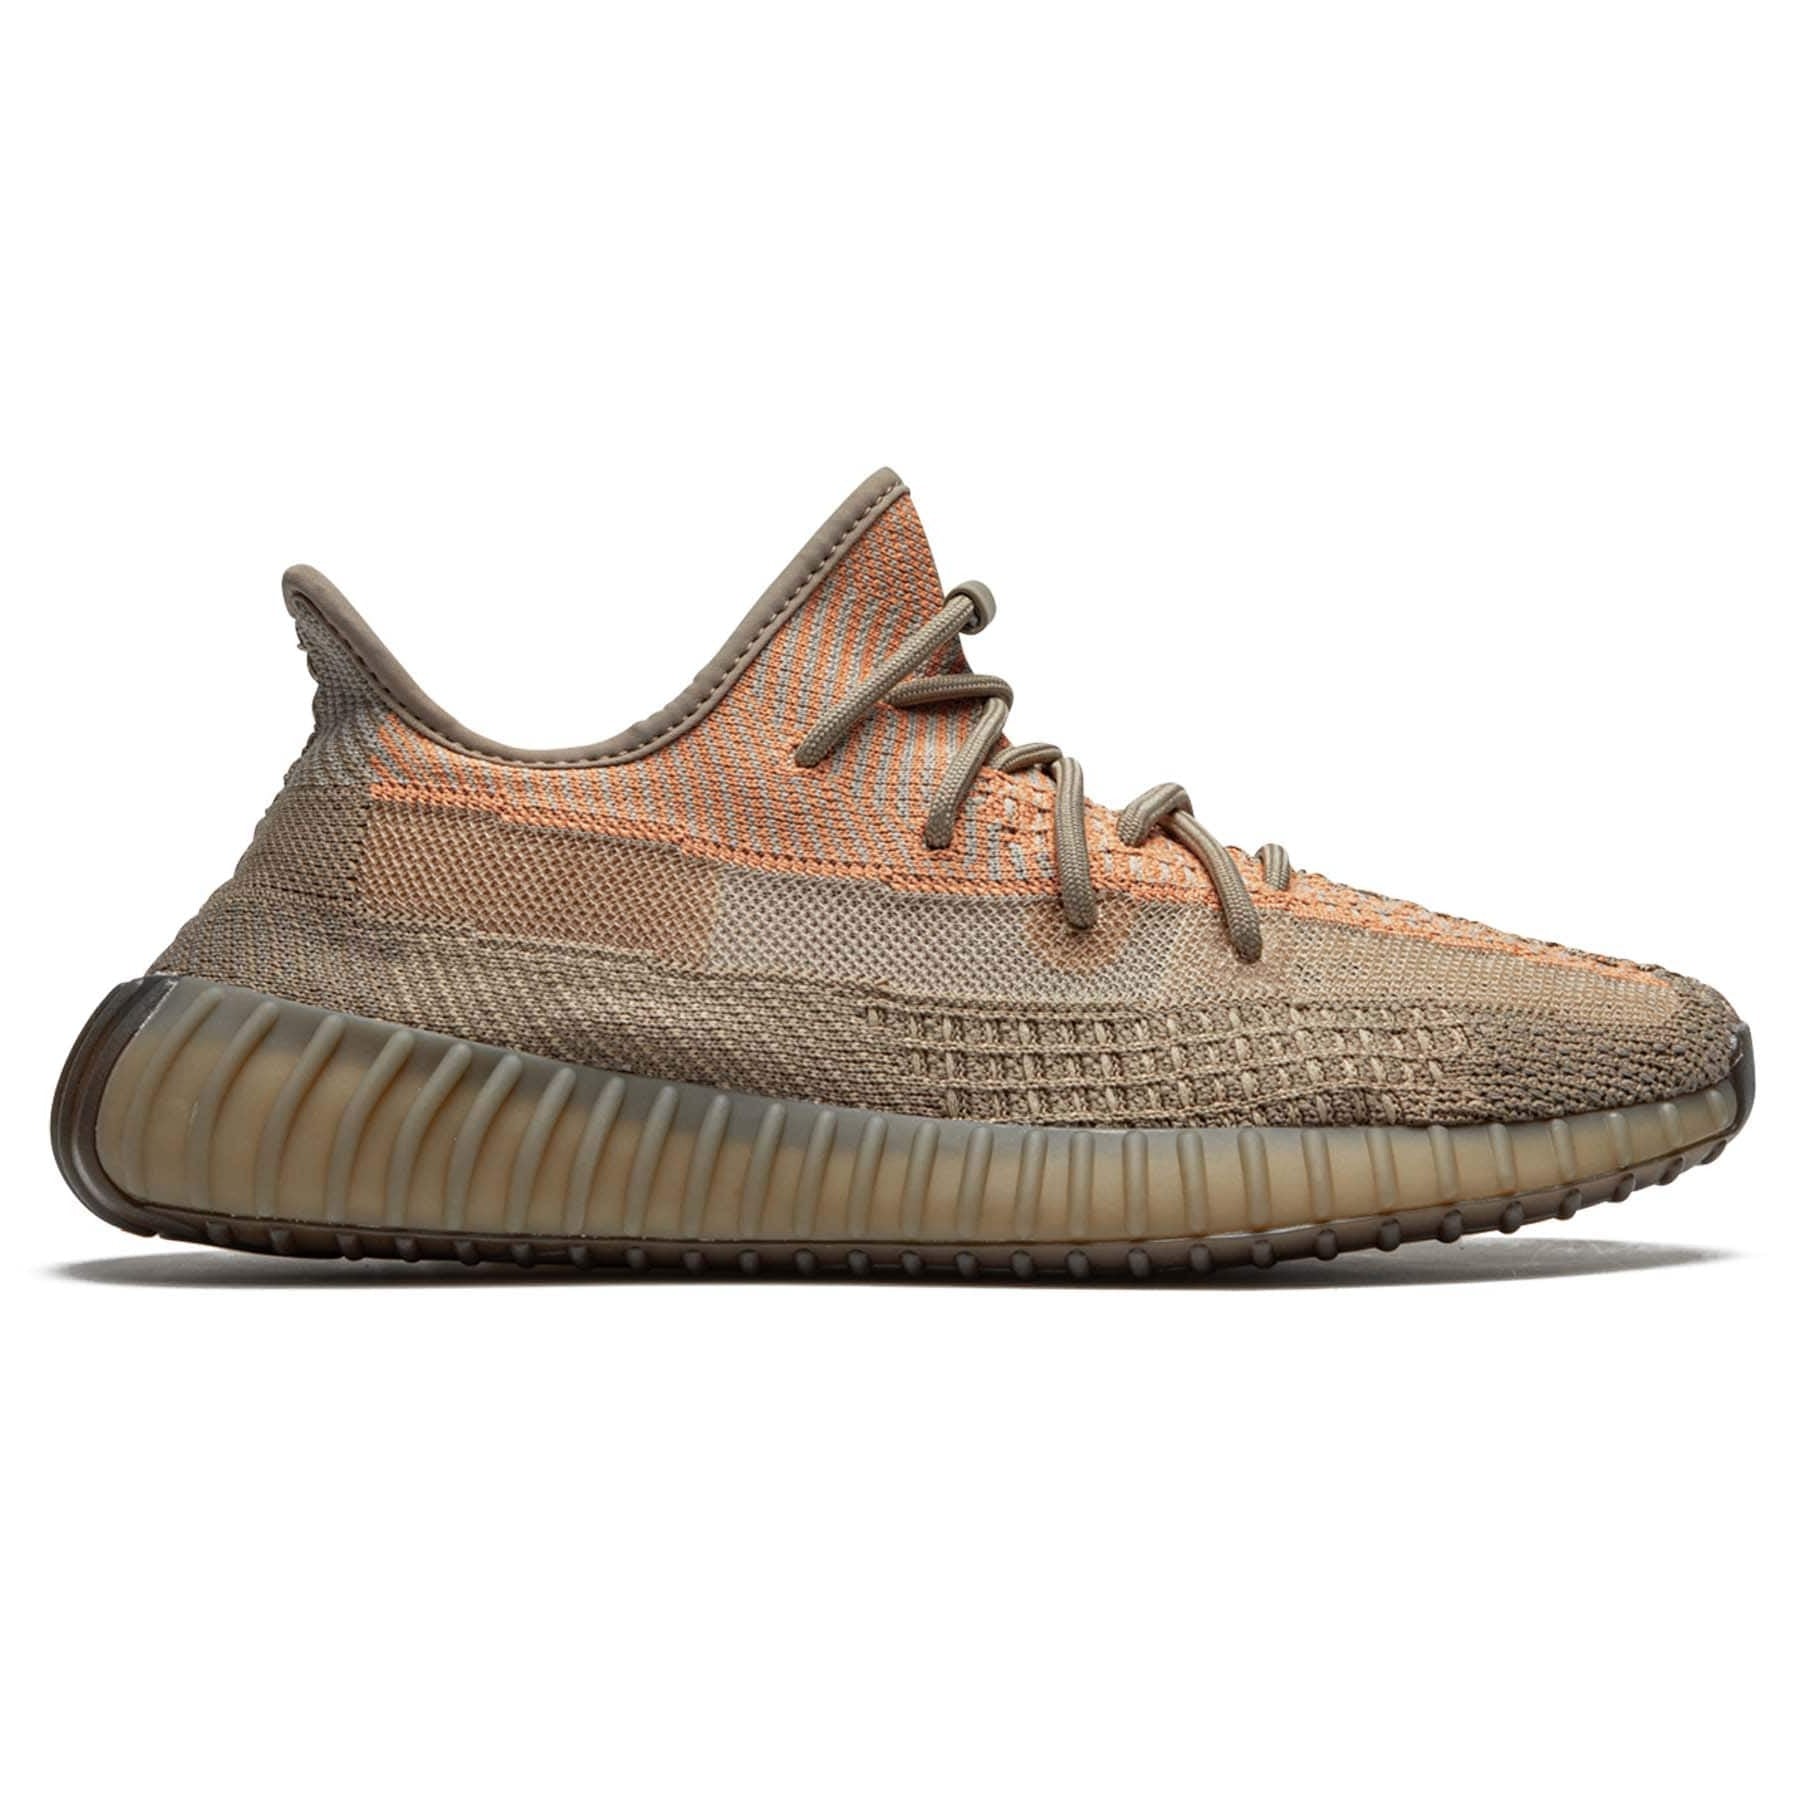 Adidas Yeezy Boost 350 V2 'Sand Taupe' - OUTLET – What's Your Size UK